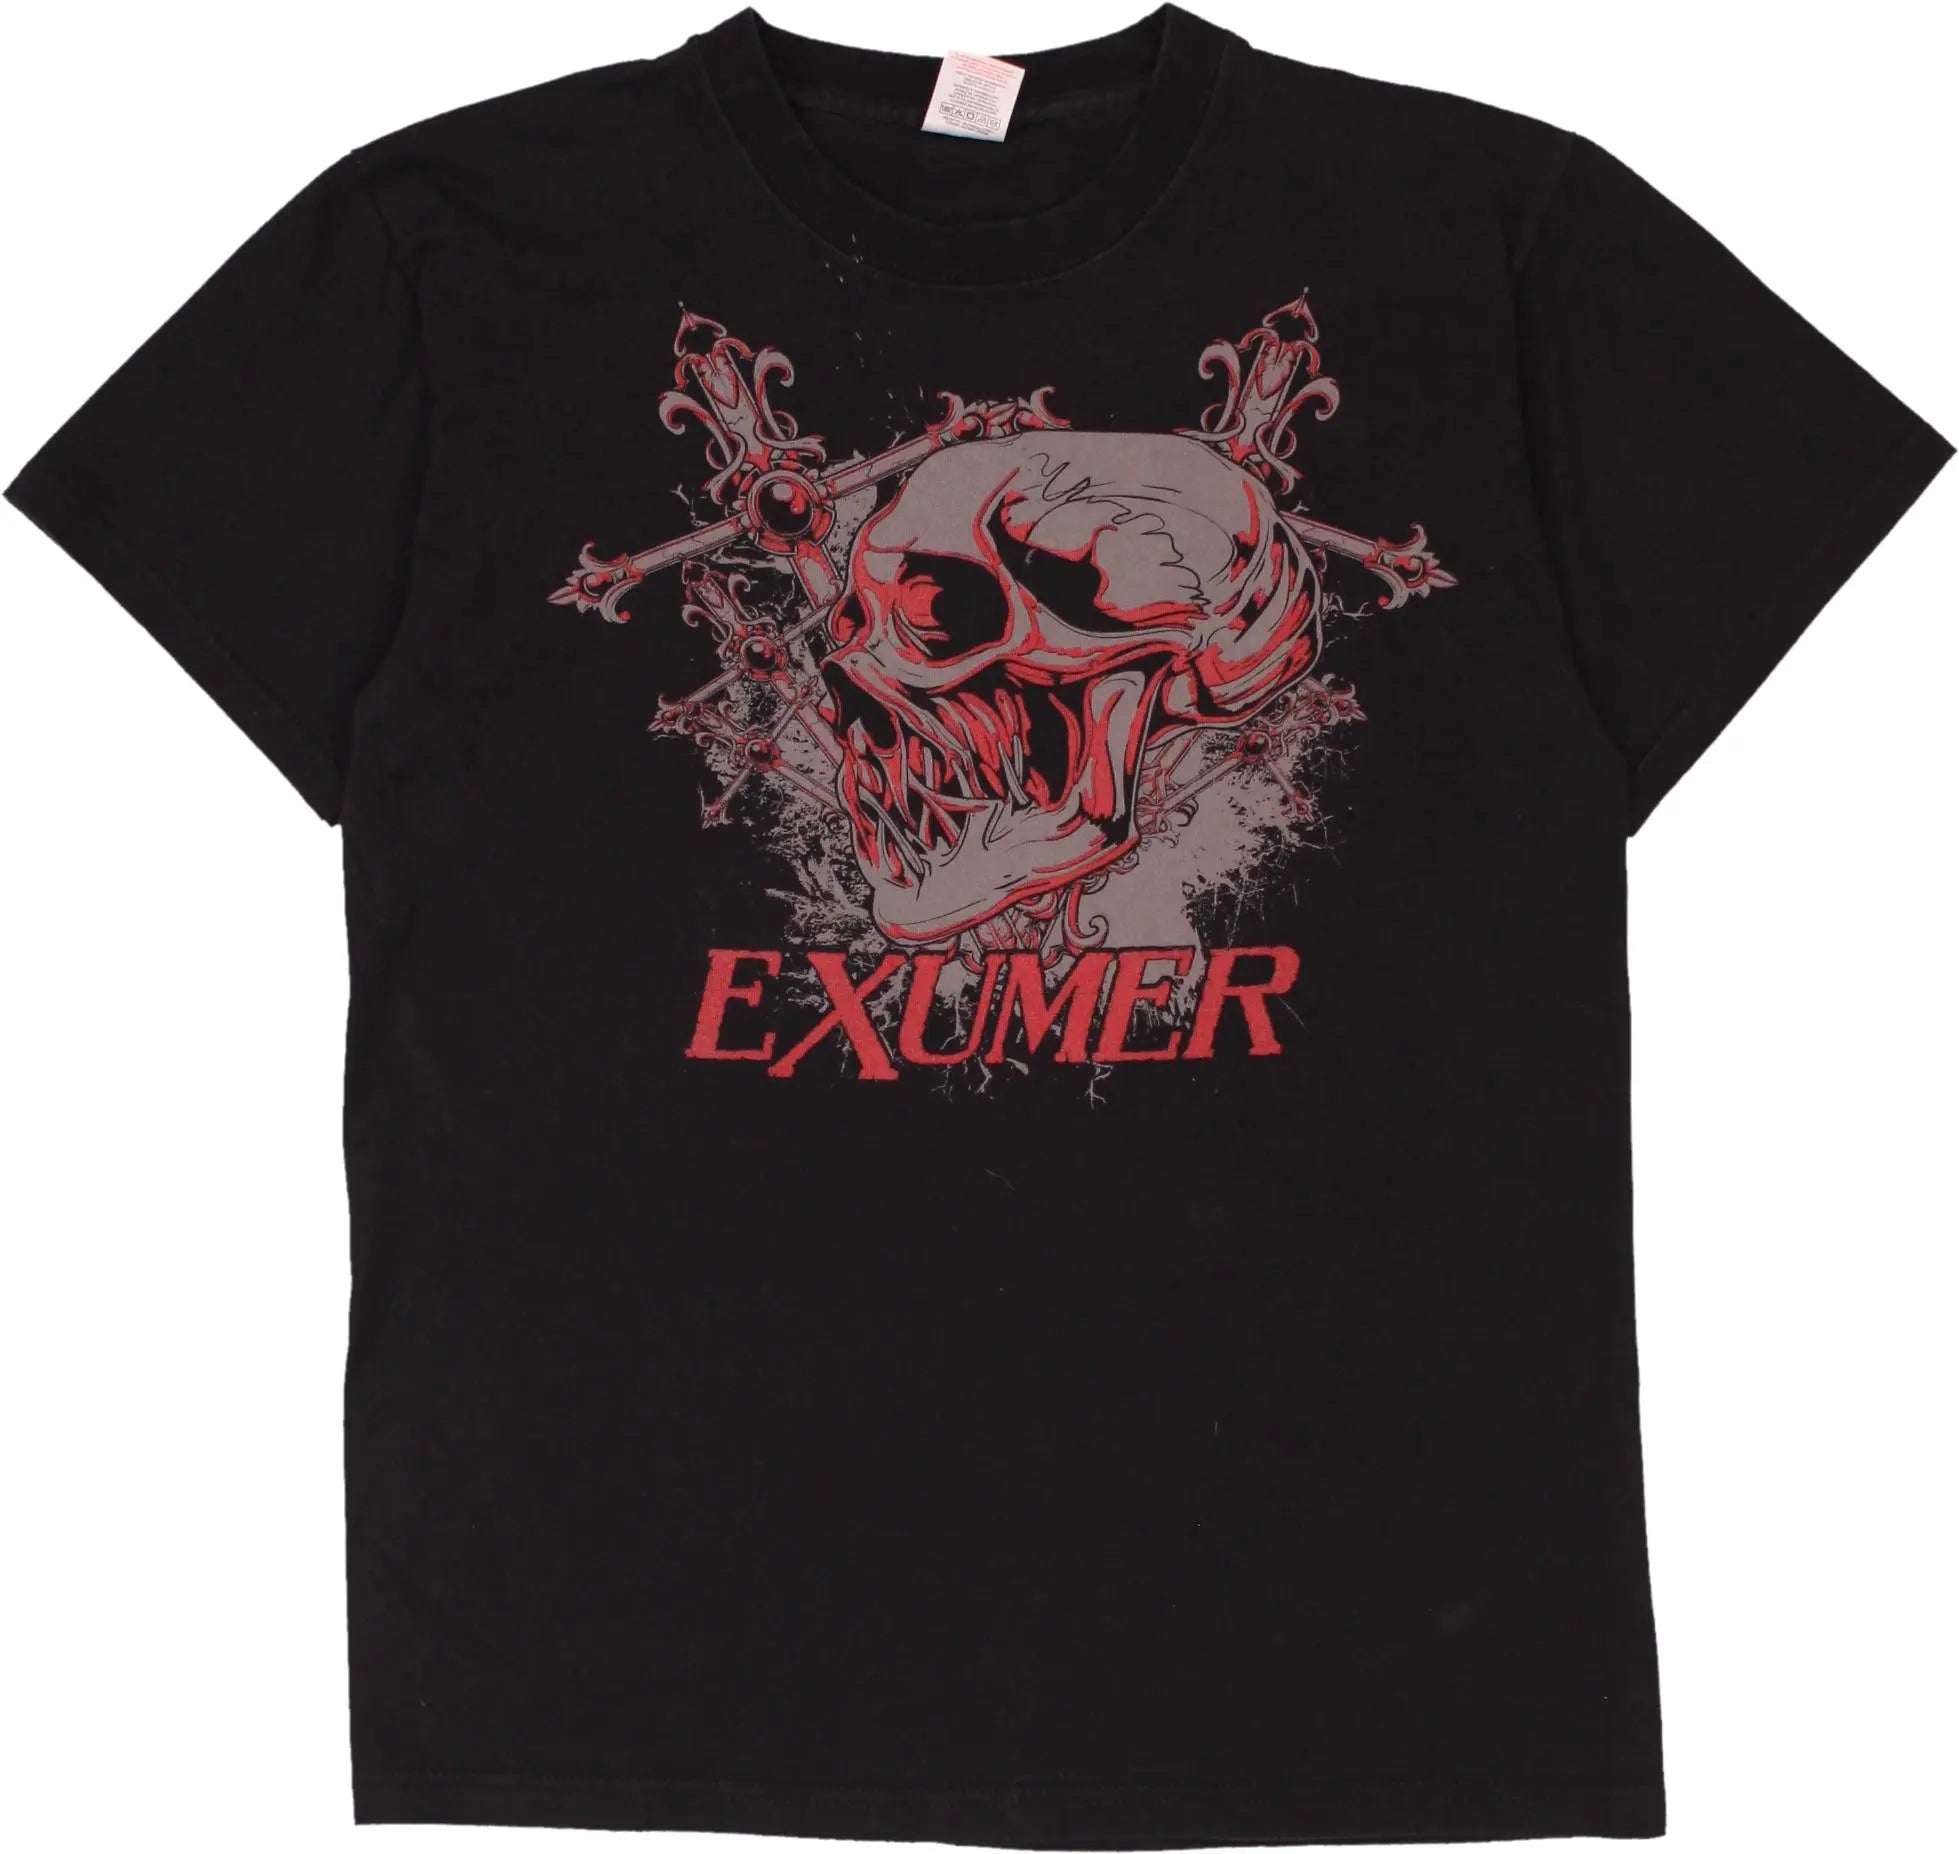 Fruit of the Loom - Exumer Skull T-shirt- ThriftTale.com - Vintage and second handclothing